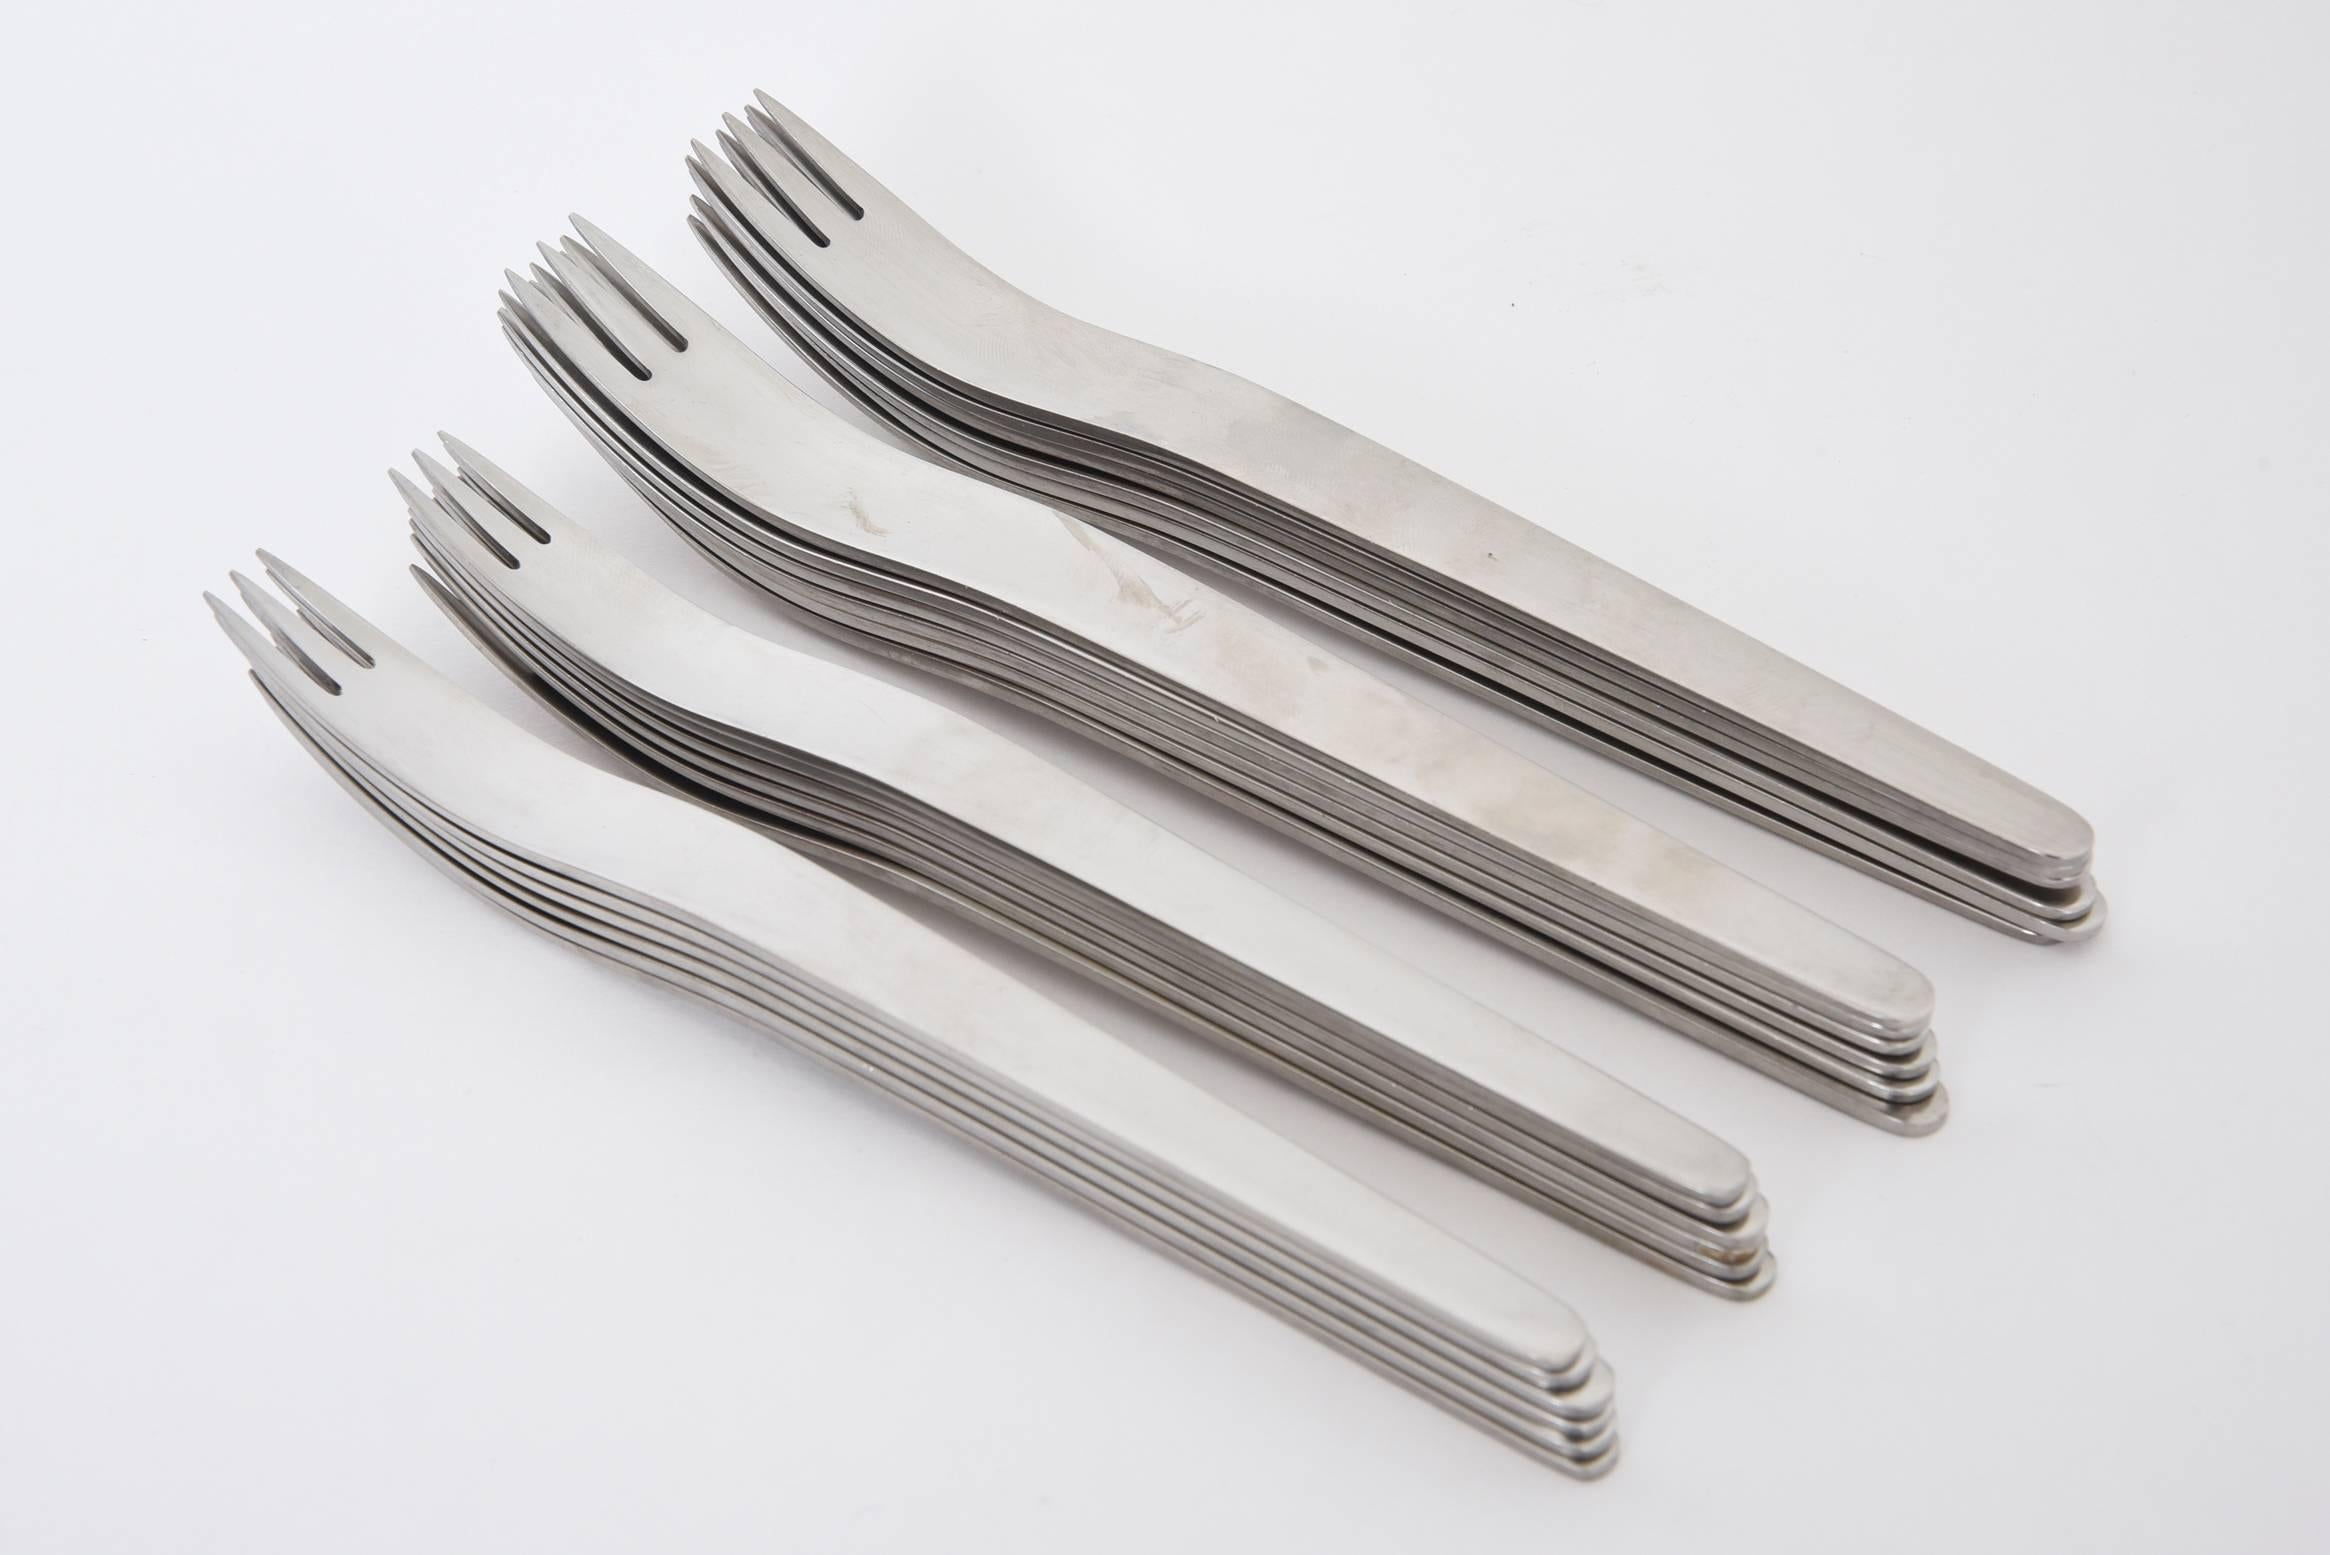 Metalwork Arne Jacobsen by Michelsen Space Age Modernist Stainless Flatware Set 106 Pieces